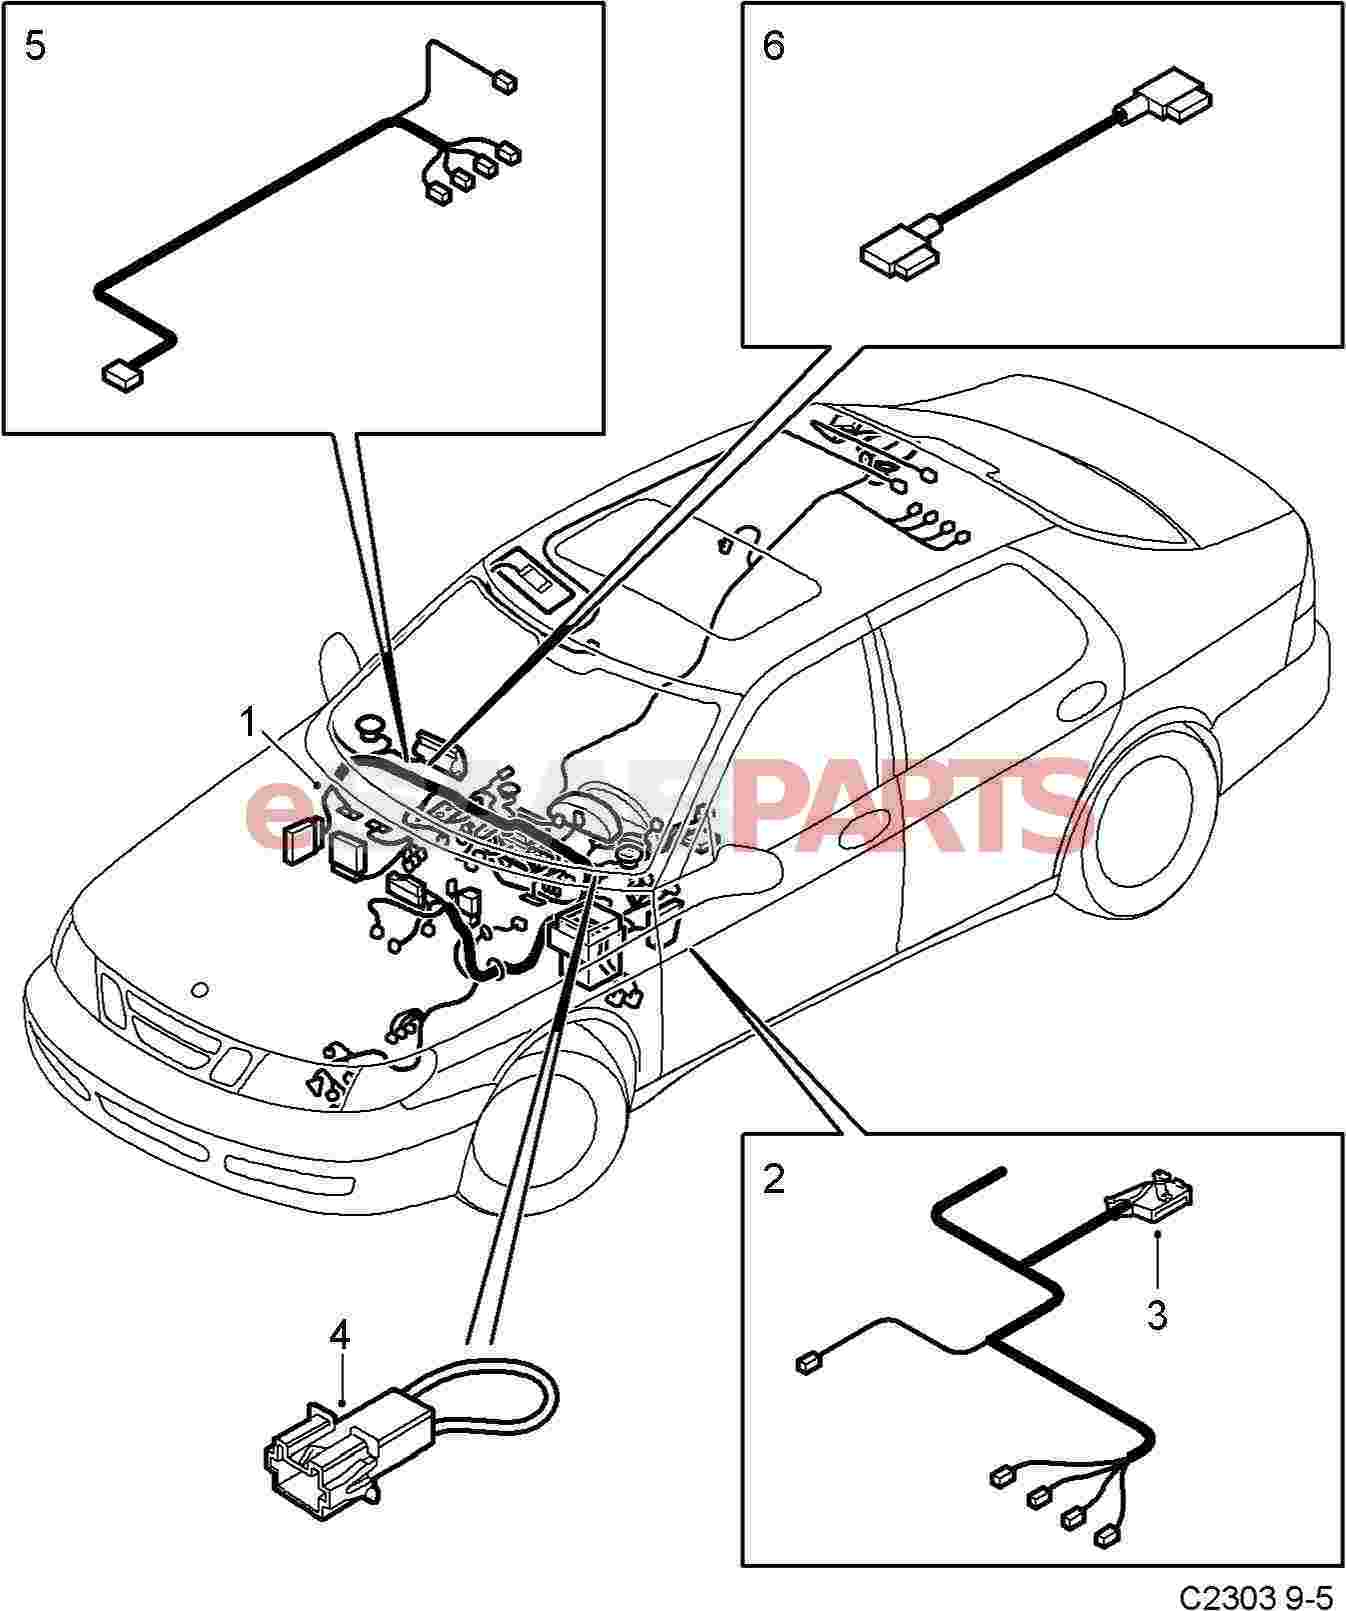 Parts Wiring Harness Instrument Panel